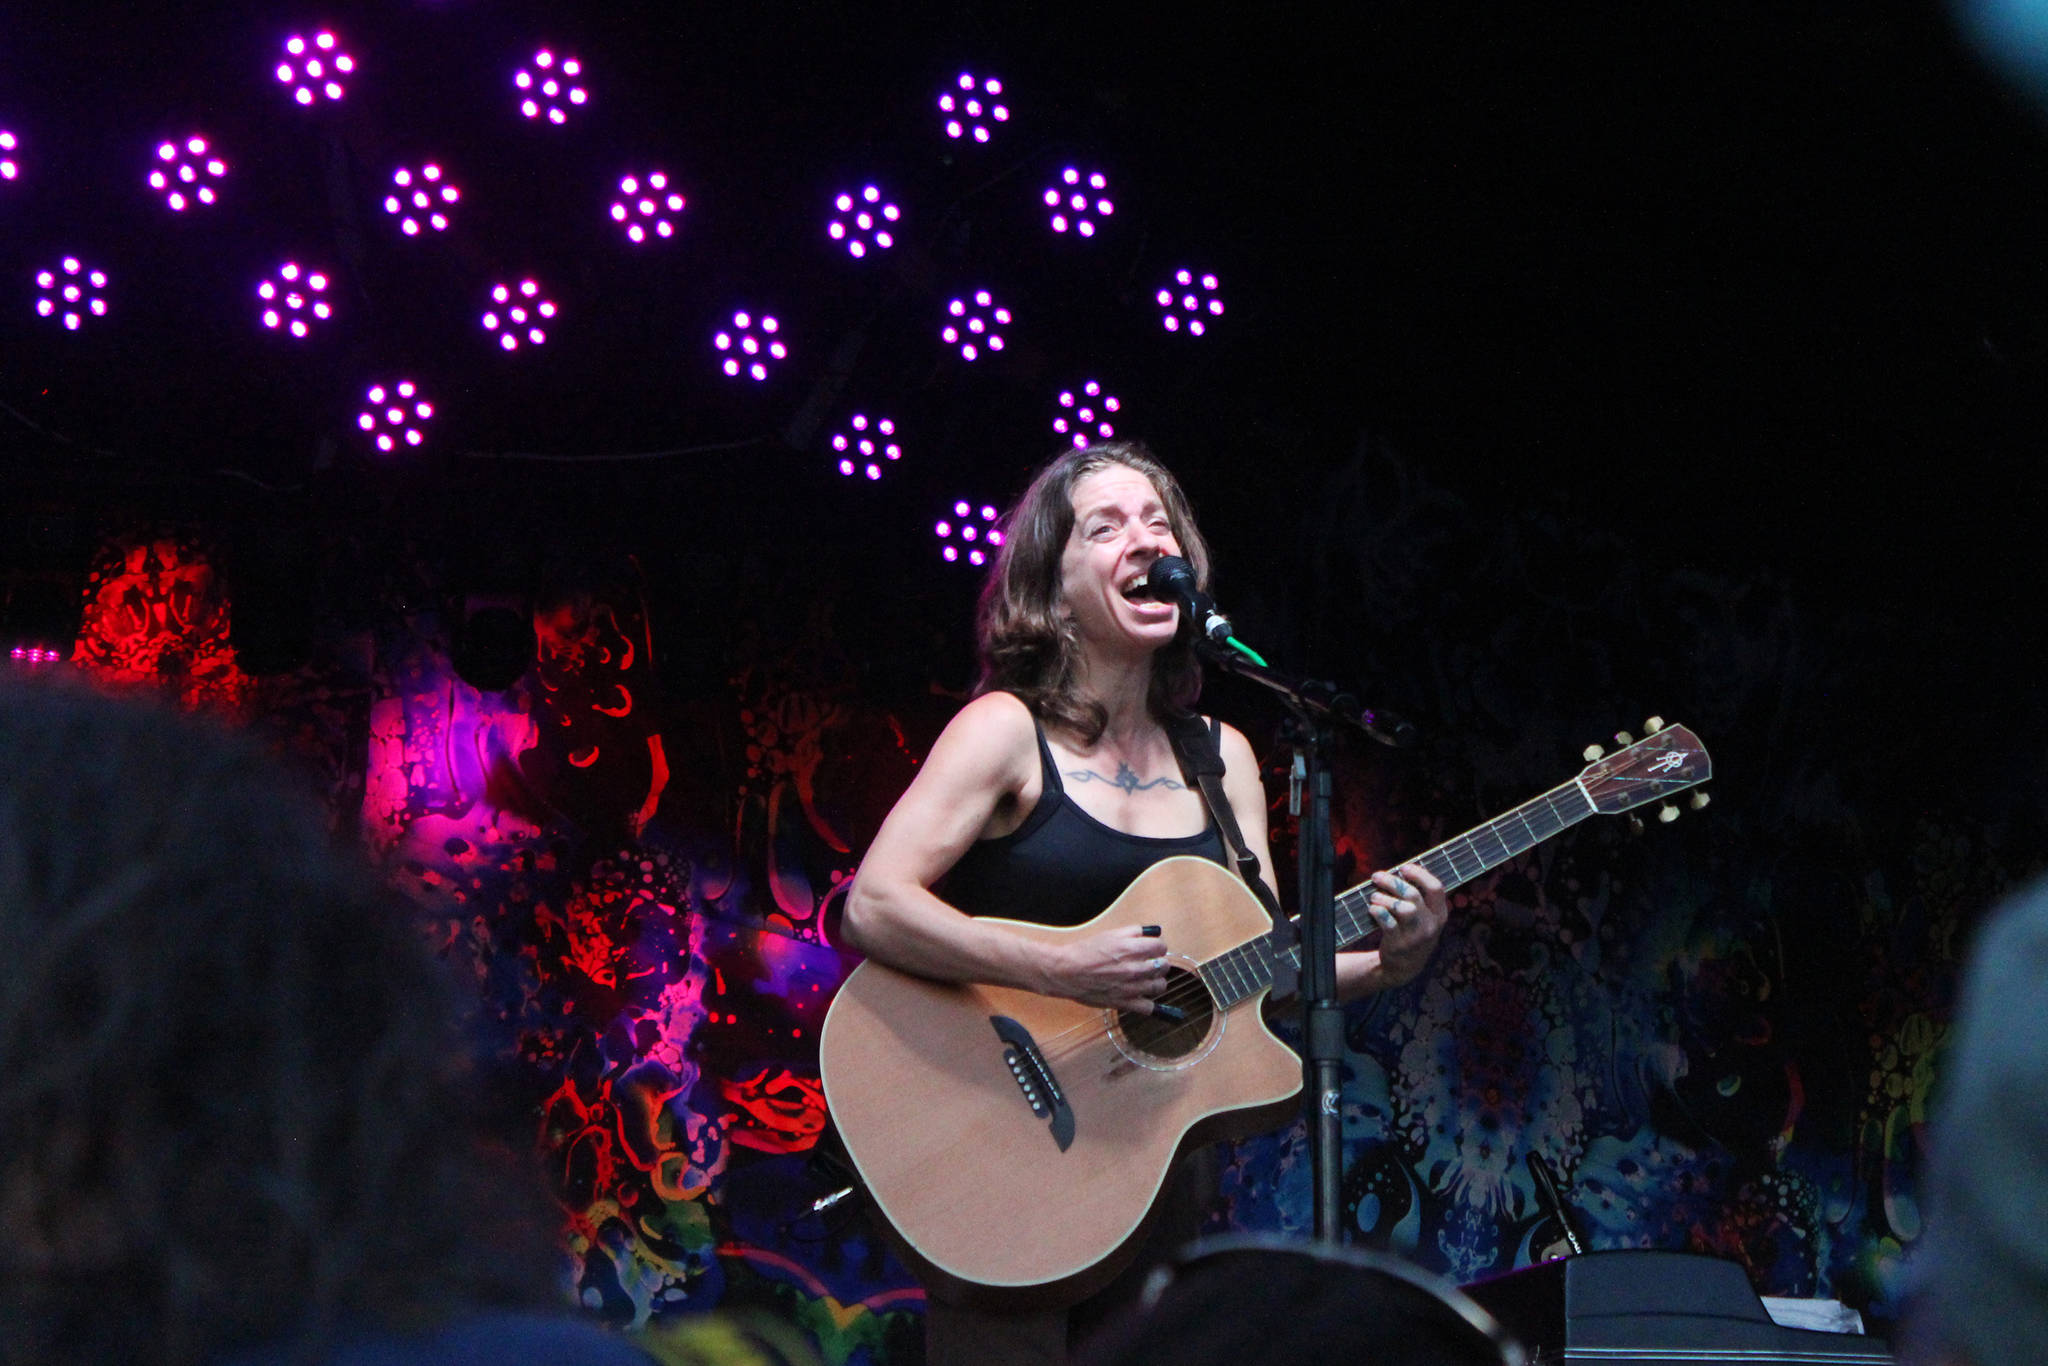 Ani DiFranco performs as the headliner at Salmonfest on Friday, Aug. 2, 2019 in Ninilchik, Alaska. (Photo by Megan Pacer/Homer News)